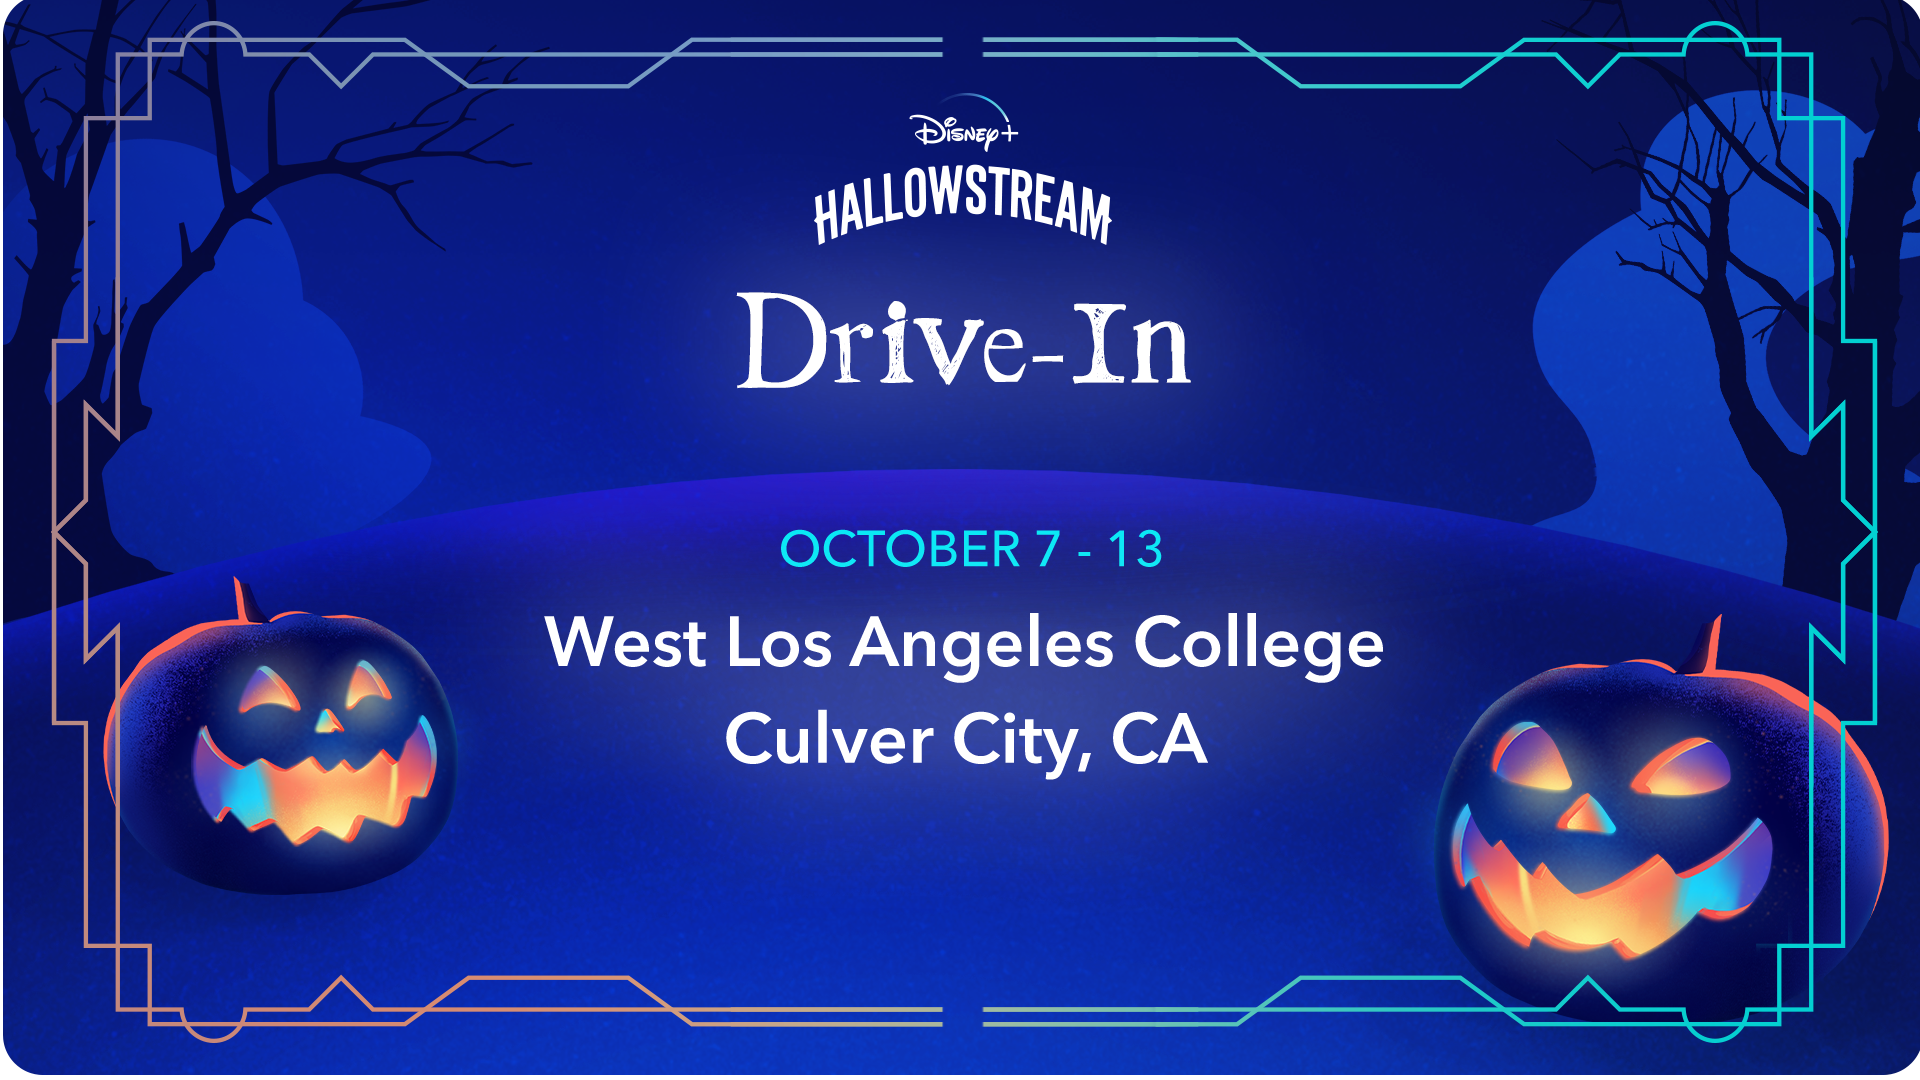 Disney+ Brings Tricks And Treats To Los Angeles At Hallowstream Drive-In Screening Series October 7-13, 2021